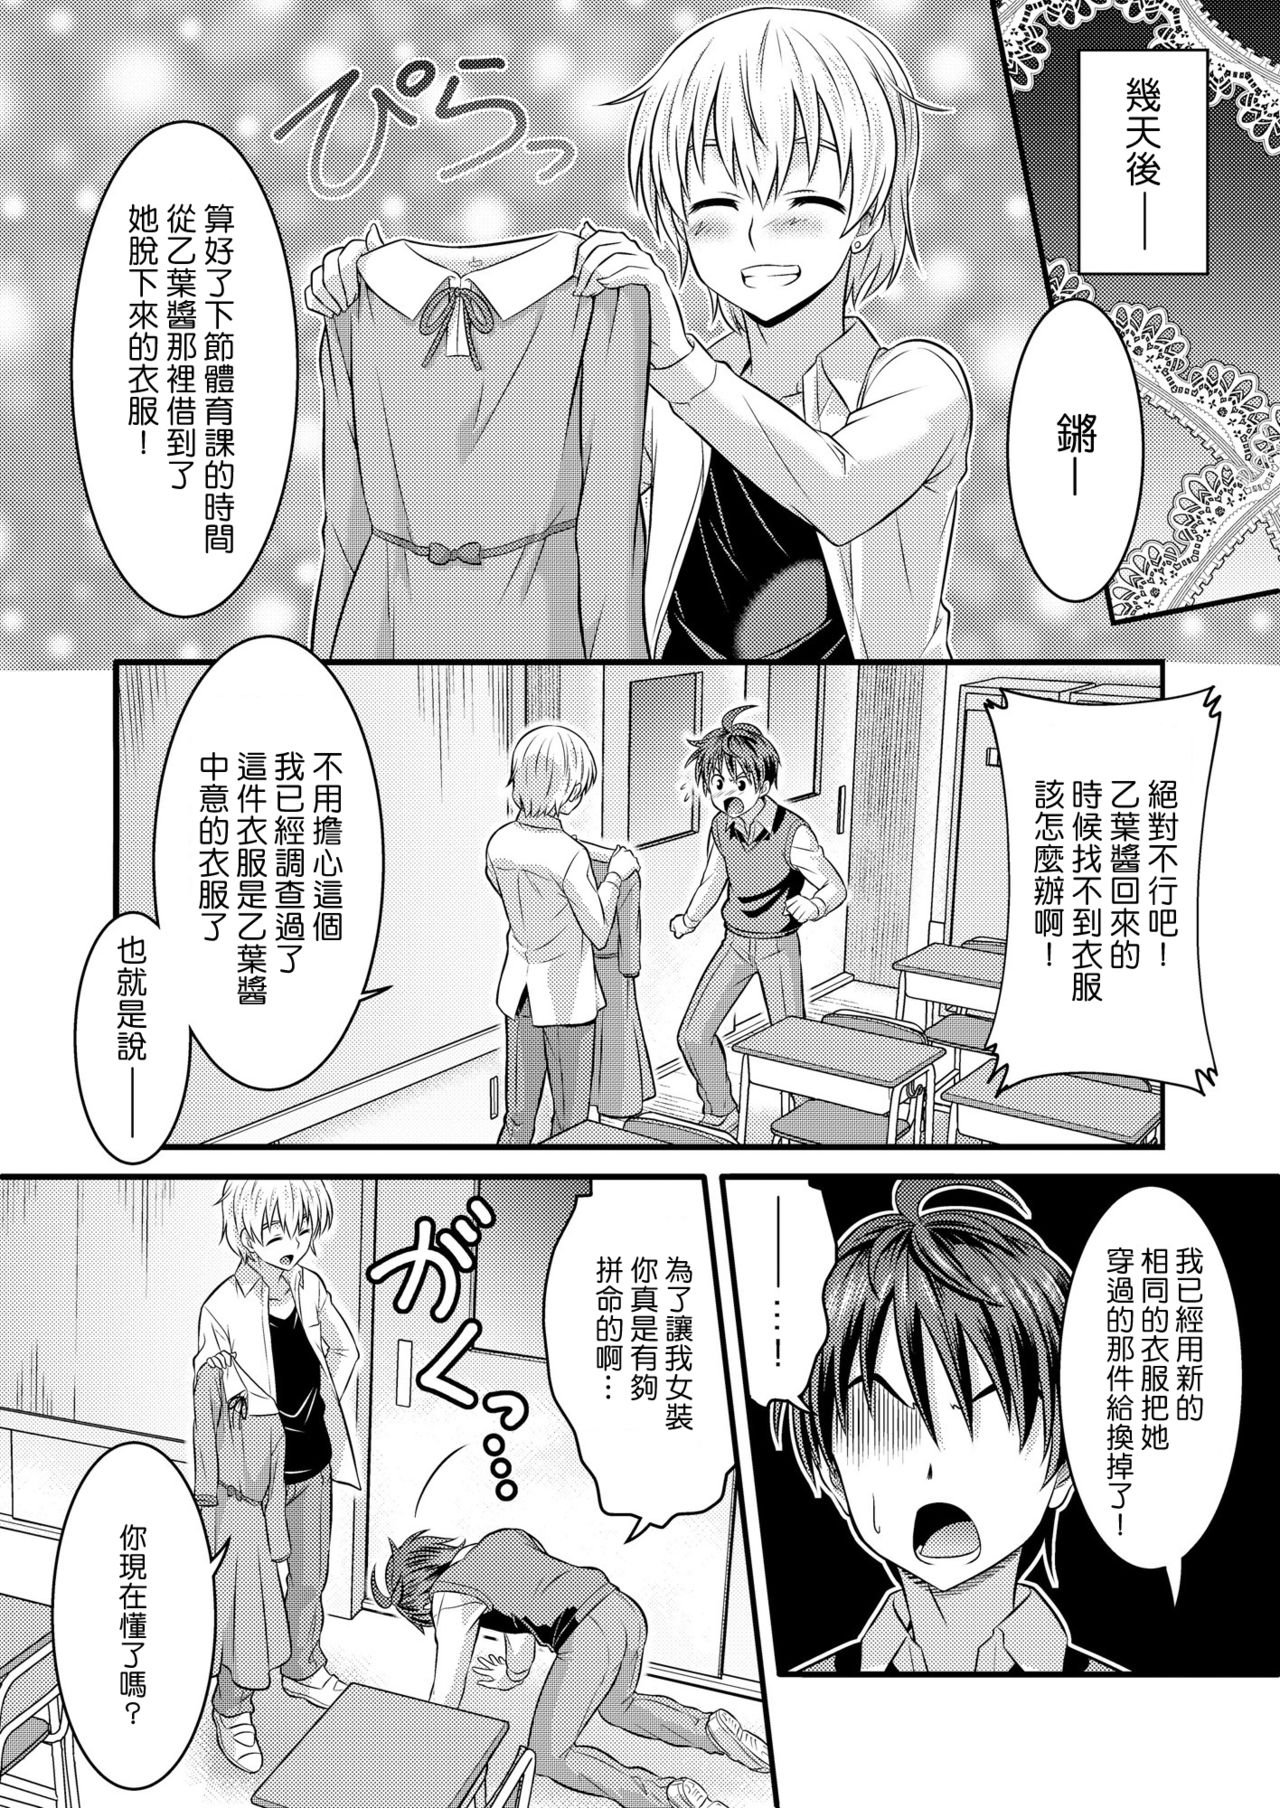 Metamorph ★ Coordination - I Become Whatever Girl I Crossdress As~ [Sister Arc, Classmate Arc] [Chinese] [瑞树汉化组] page 21 full